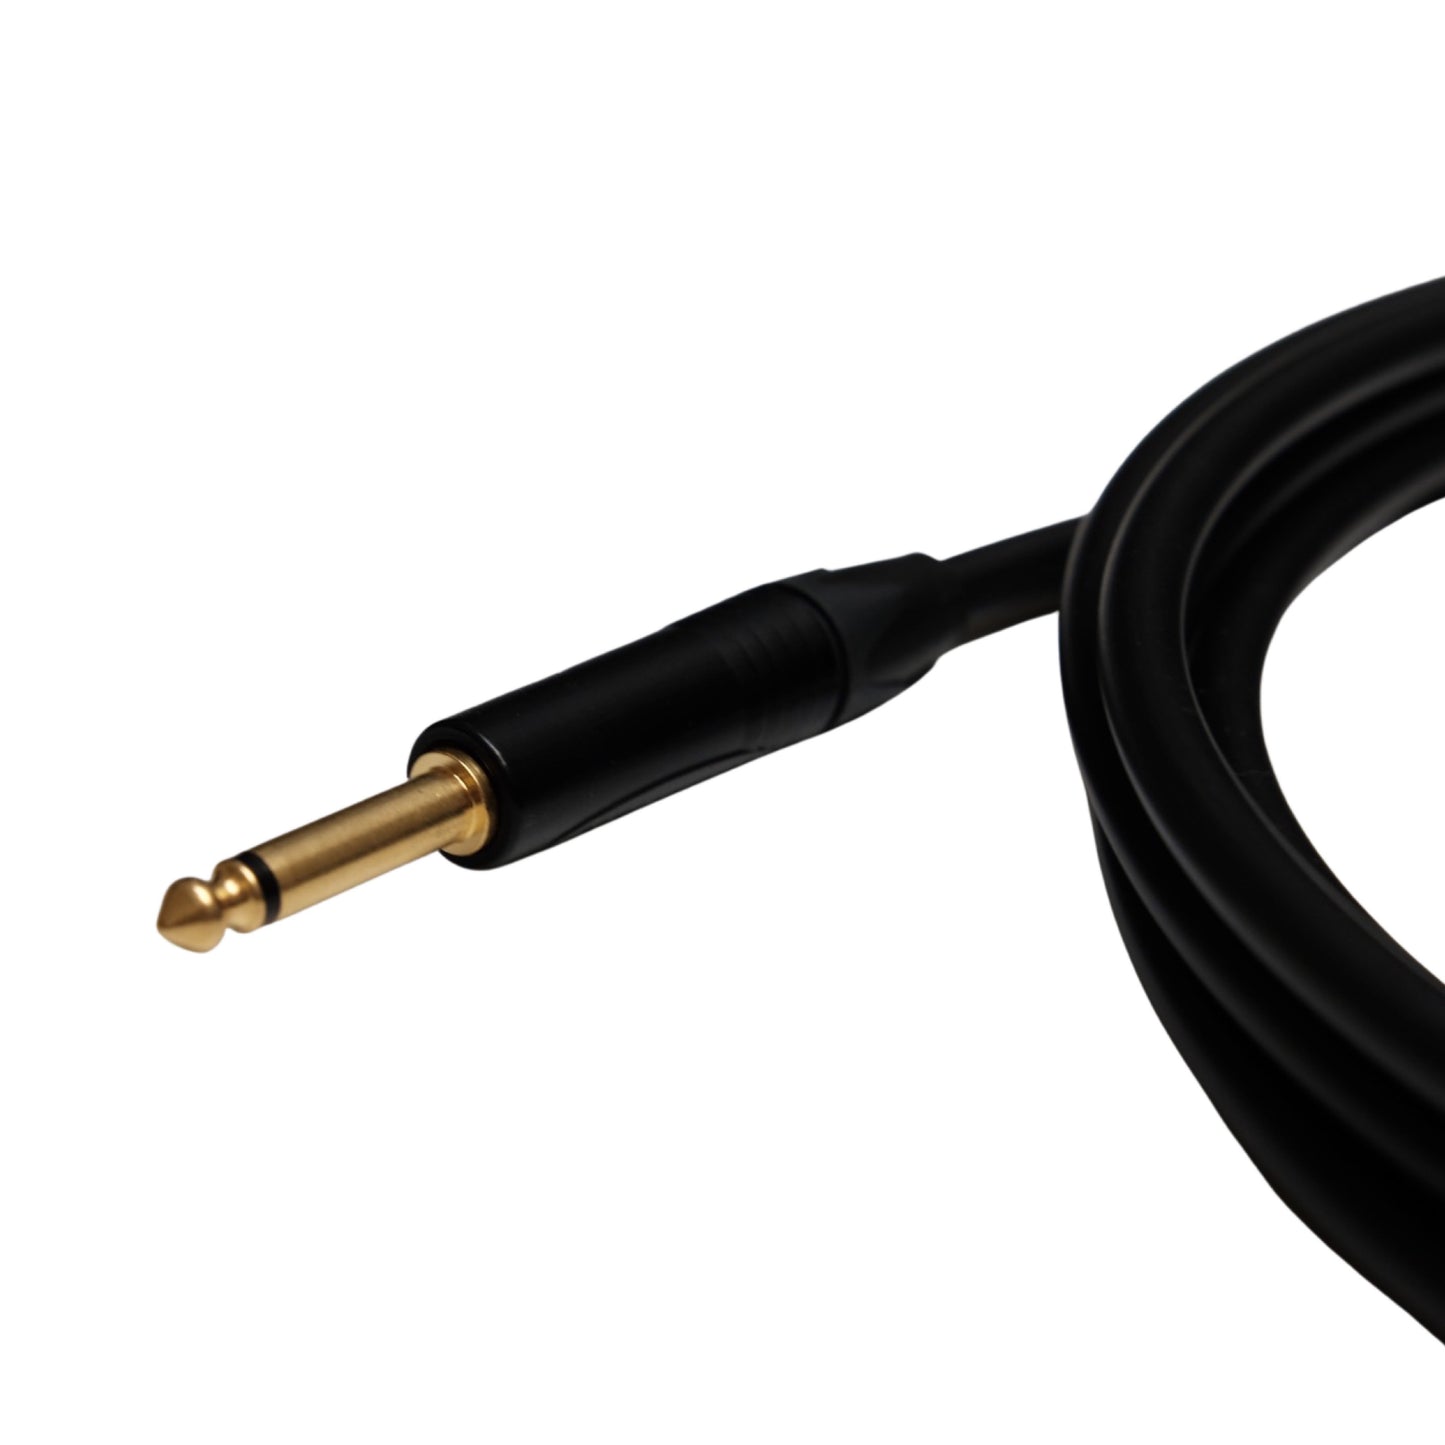 Replay Guitars Premier Instrument Cable - Made in Melbourne